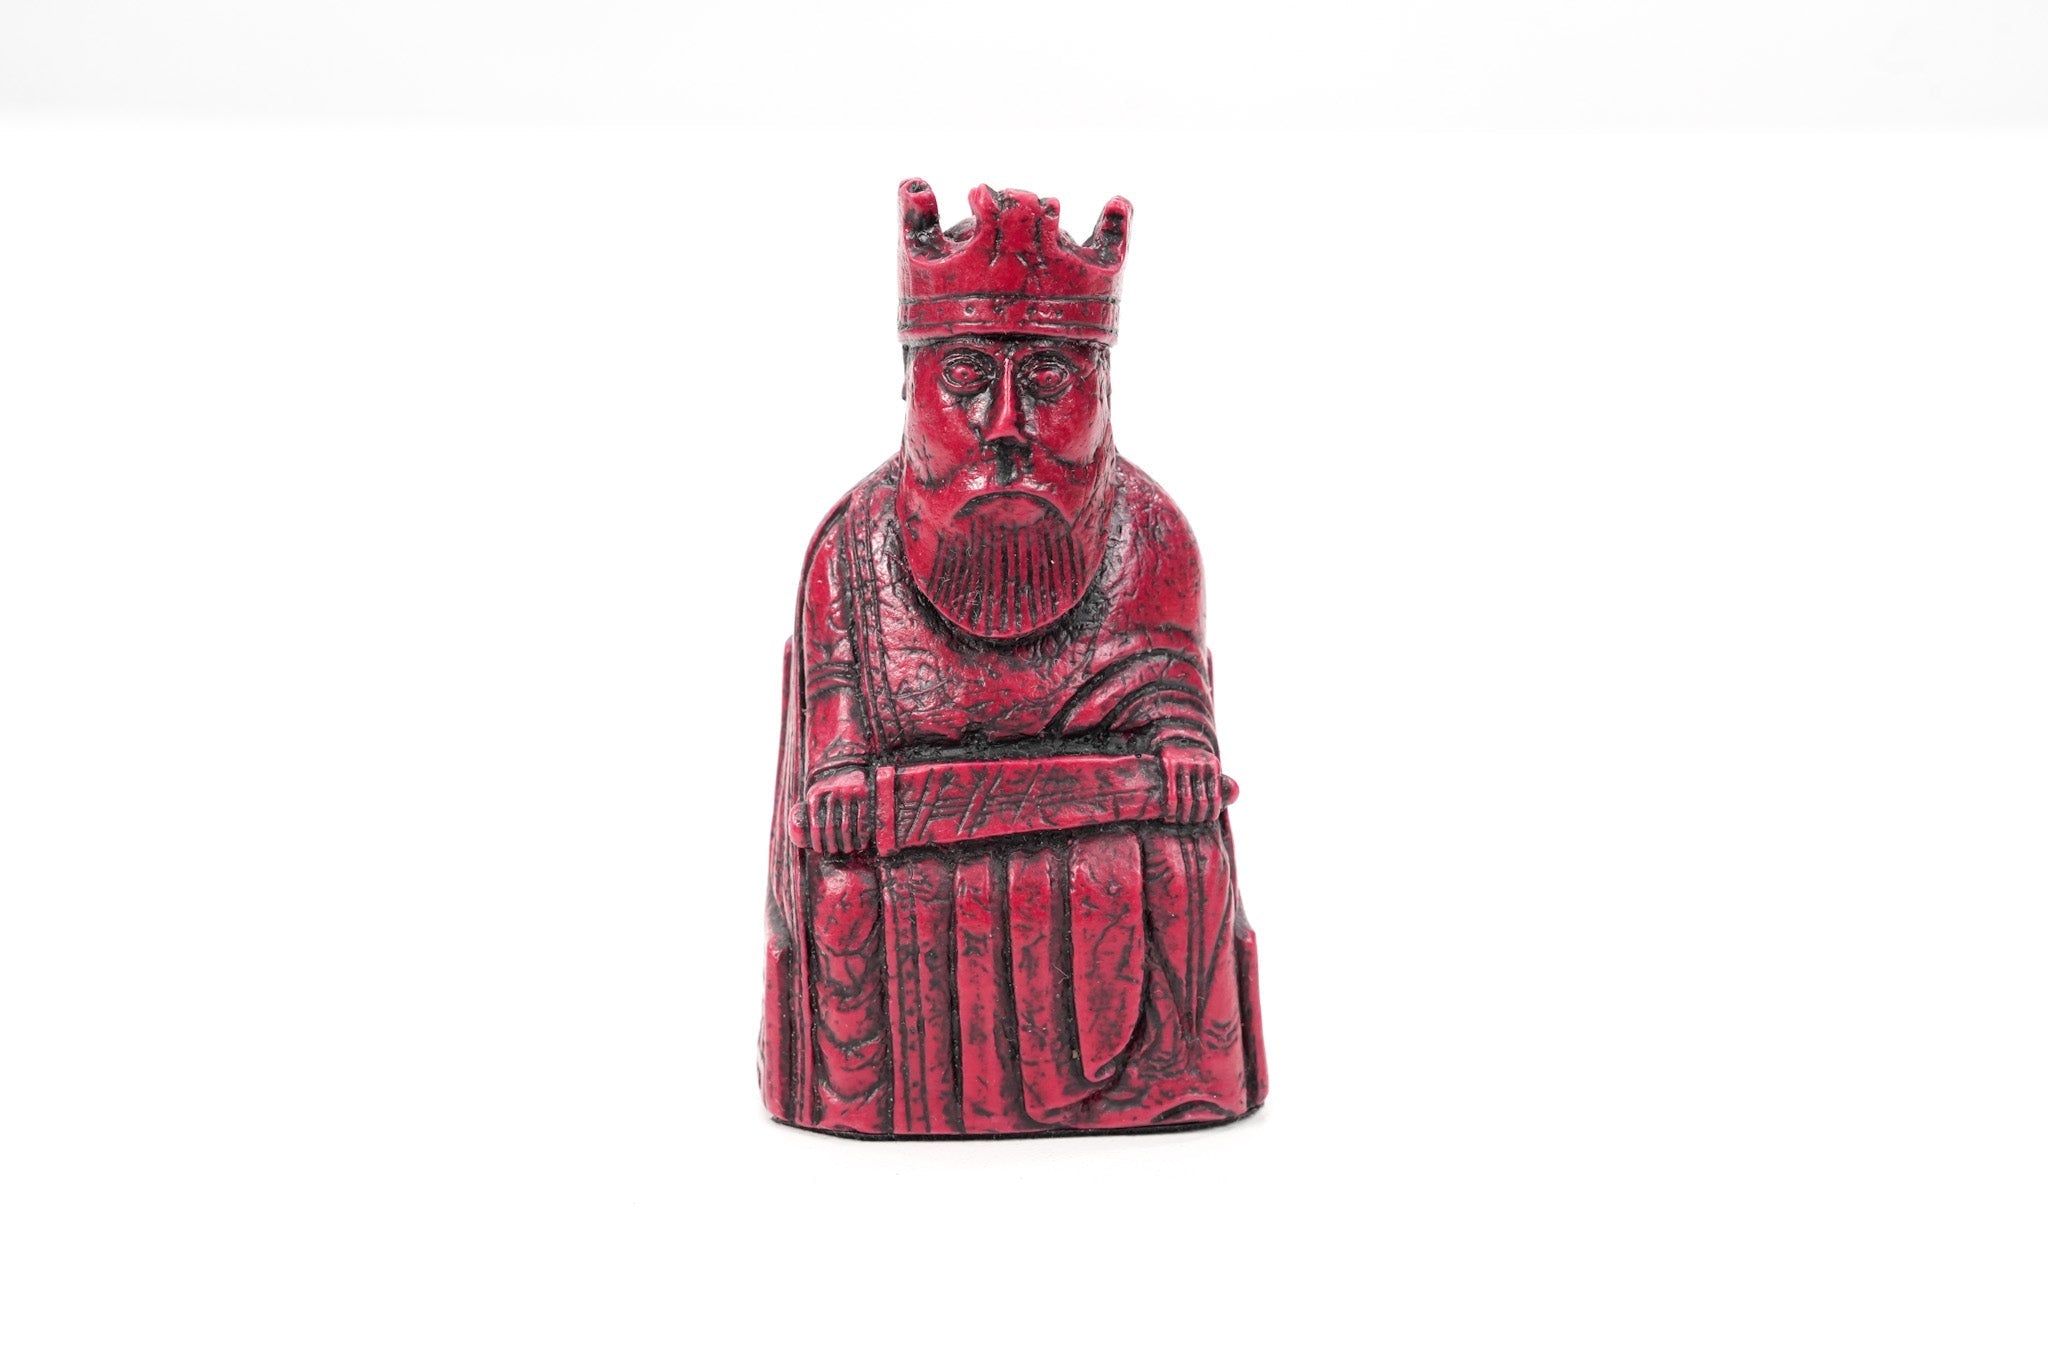 SINGLE REPLACEMENT PIECES: Isle of Lewis Chess Pieces by Berkeley - Cardinal Red - Parts - Chess-House